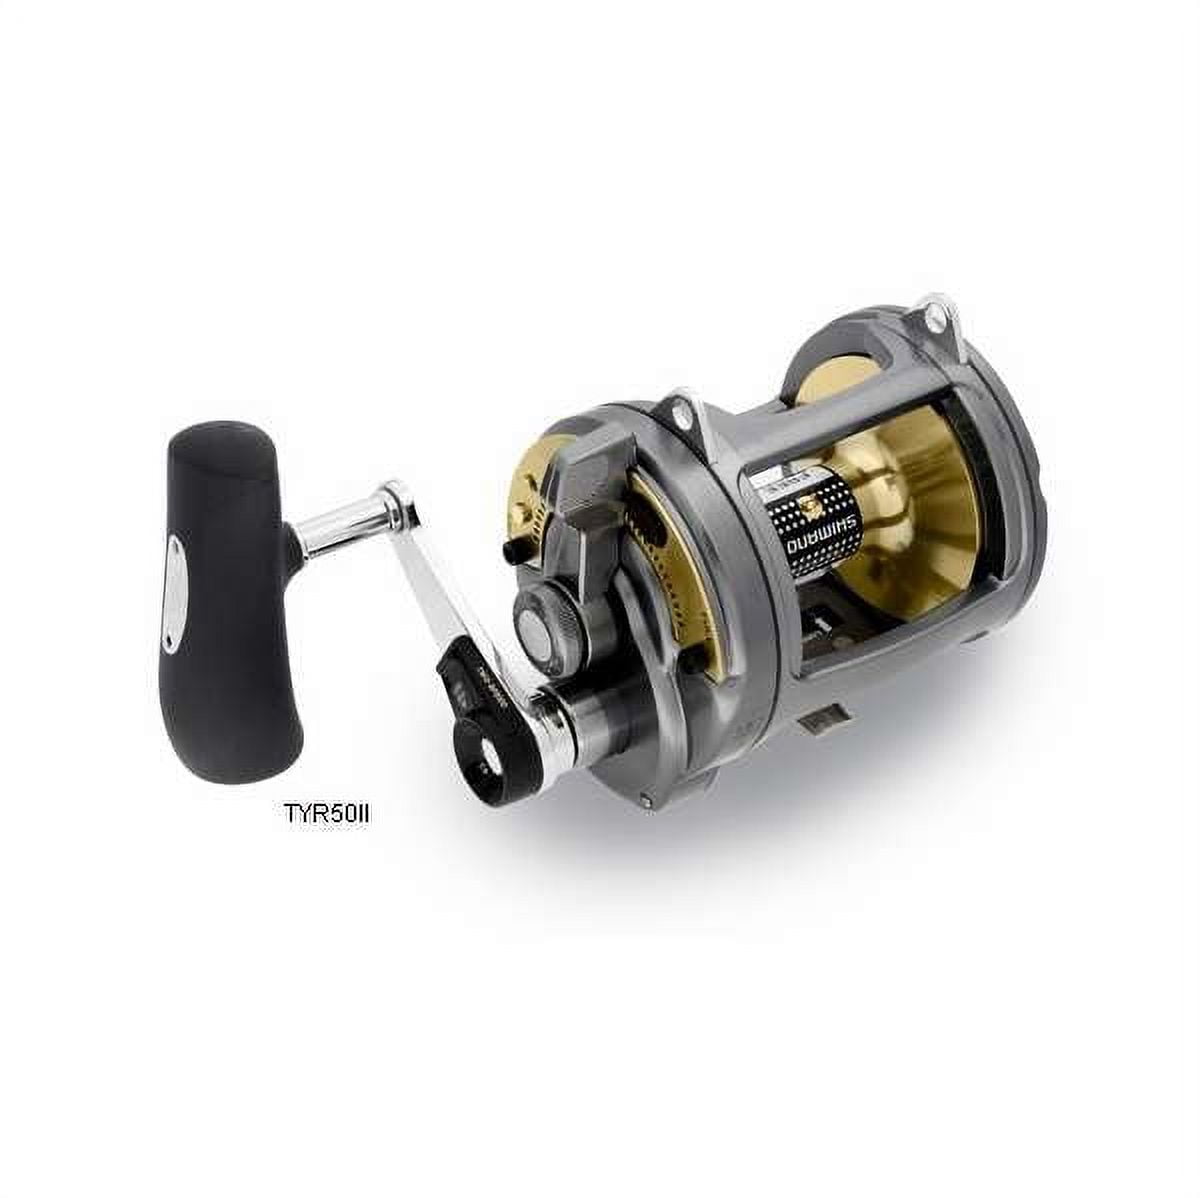 Shimano Fishing TYRNOS 30 LEVER DRG 2 SPD Conventional Reels [TYR30II] 